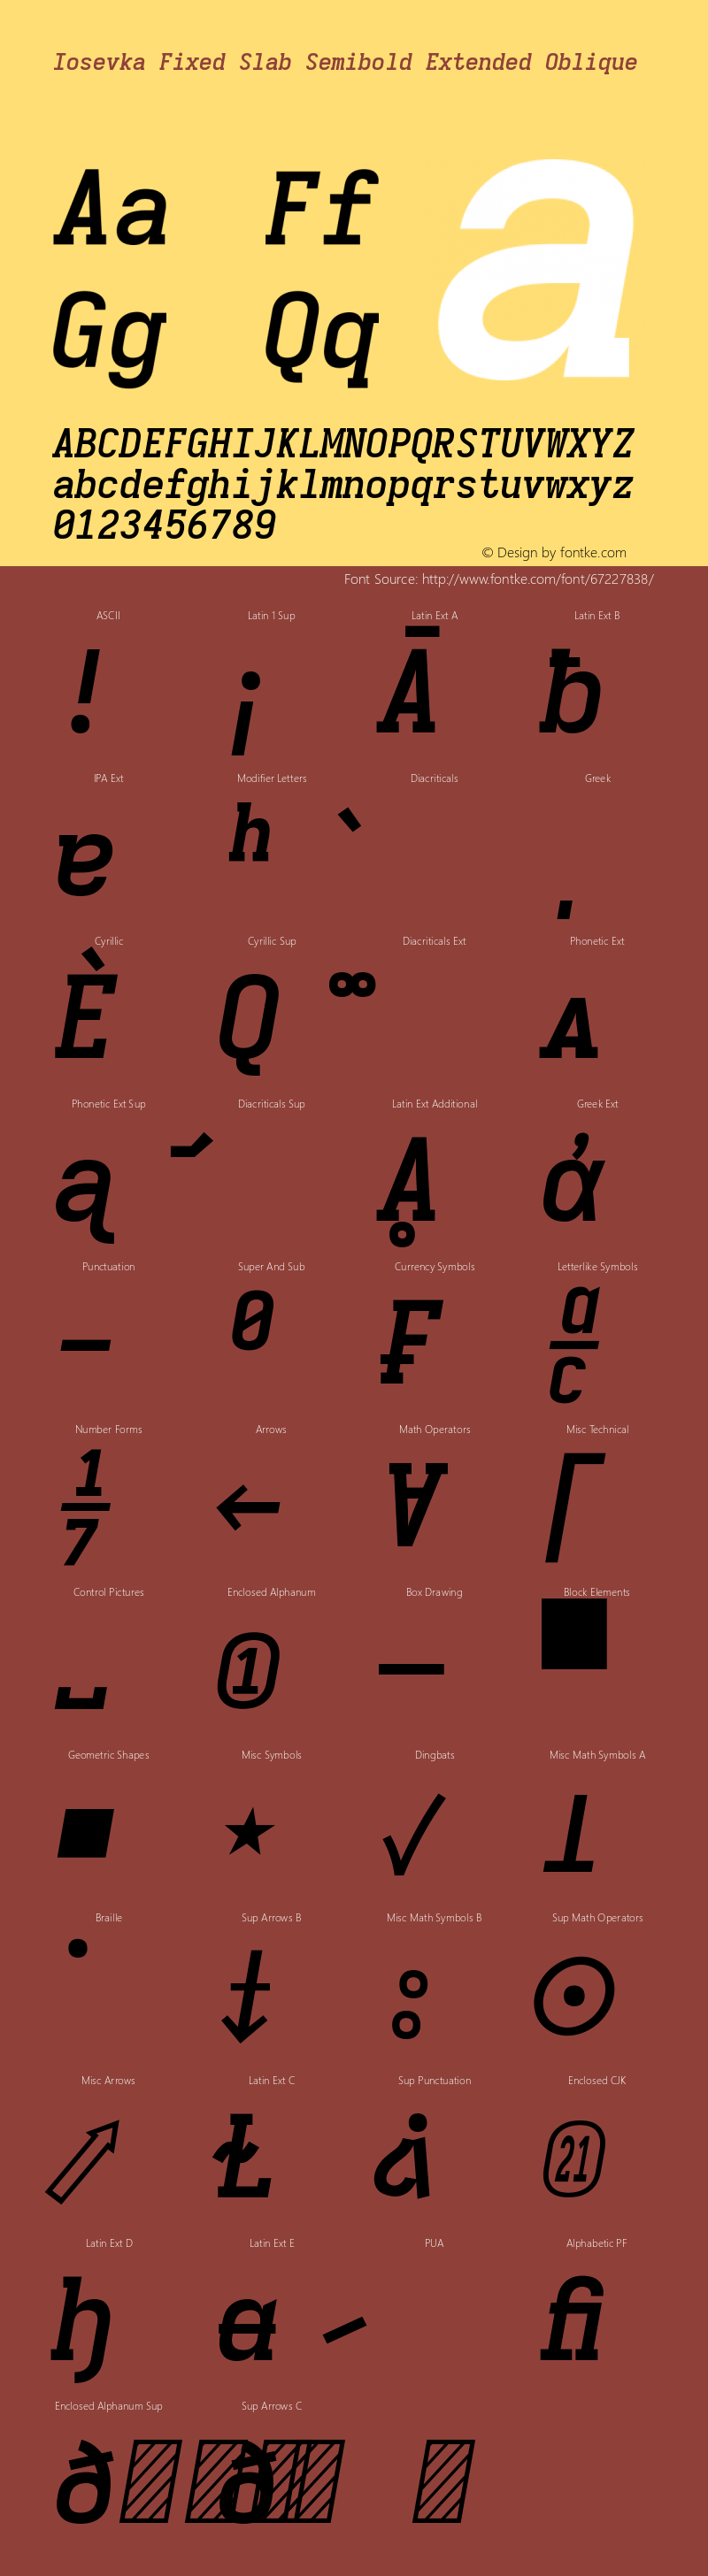 Iosevka Fixed Slab Semibold Extended Oblique 3.0.0-rc.7 Font Sample